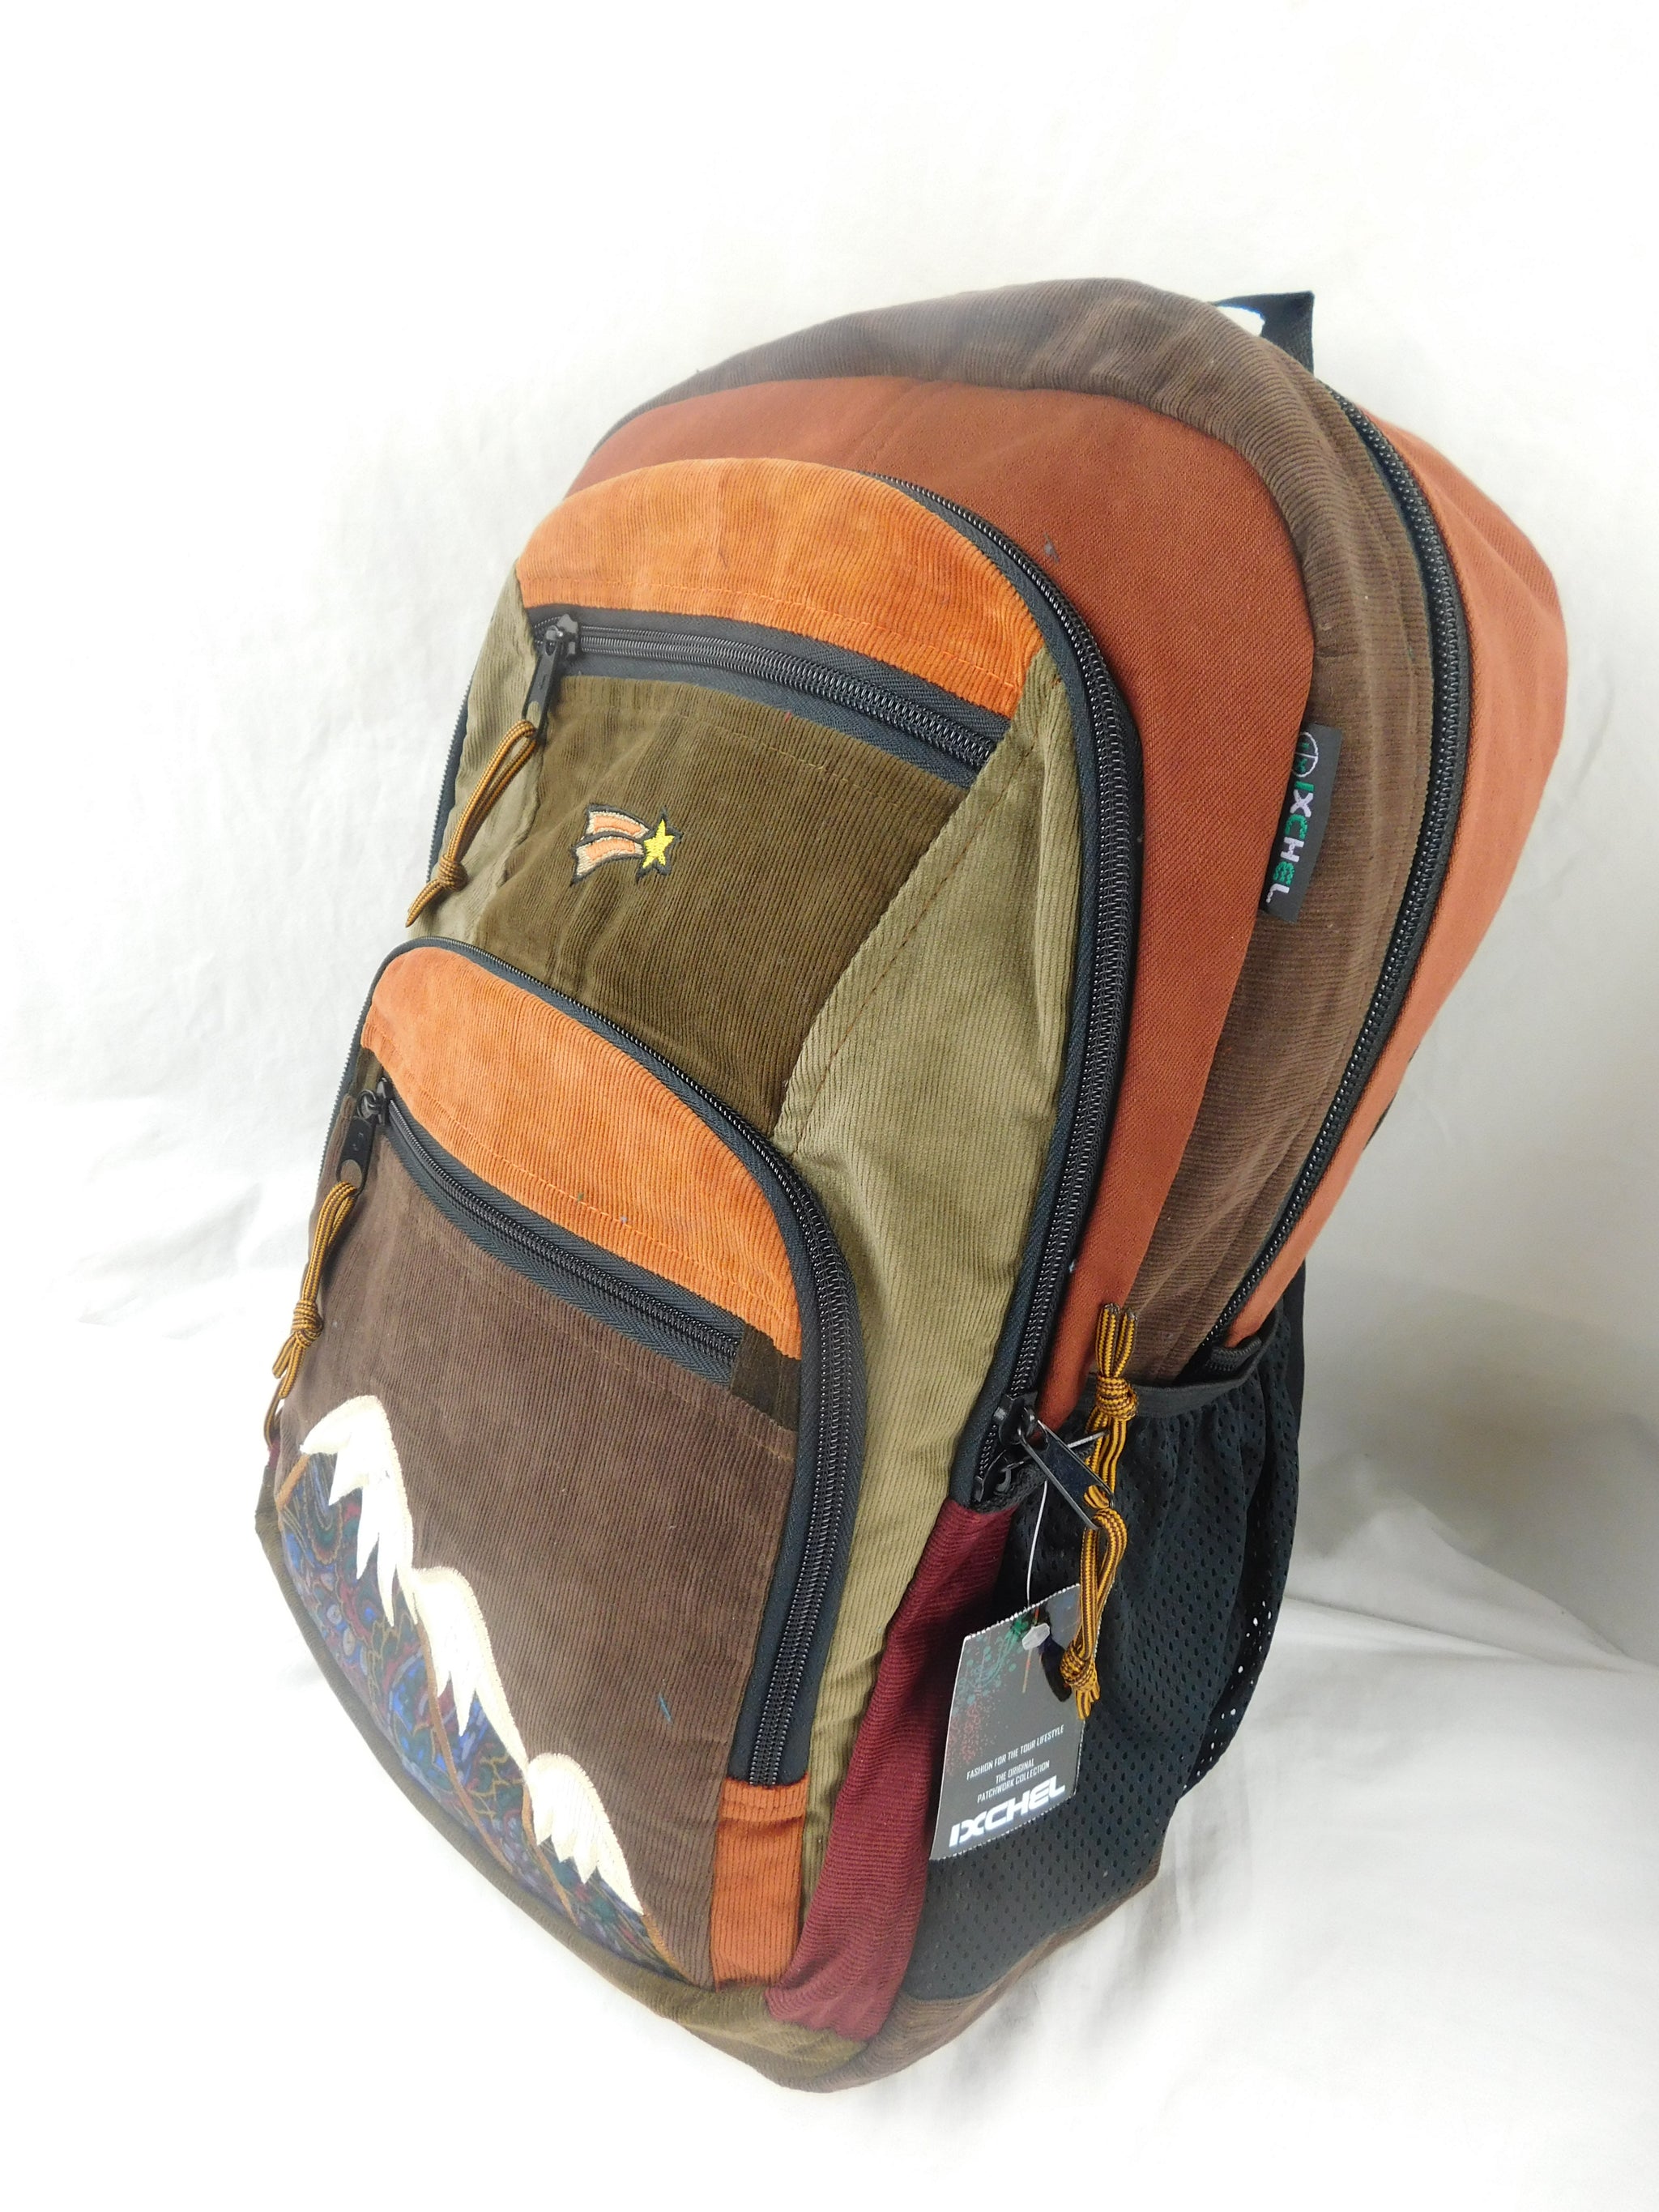 Patchwork Corduroy Backpack with Mountain Applique - Large